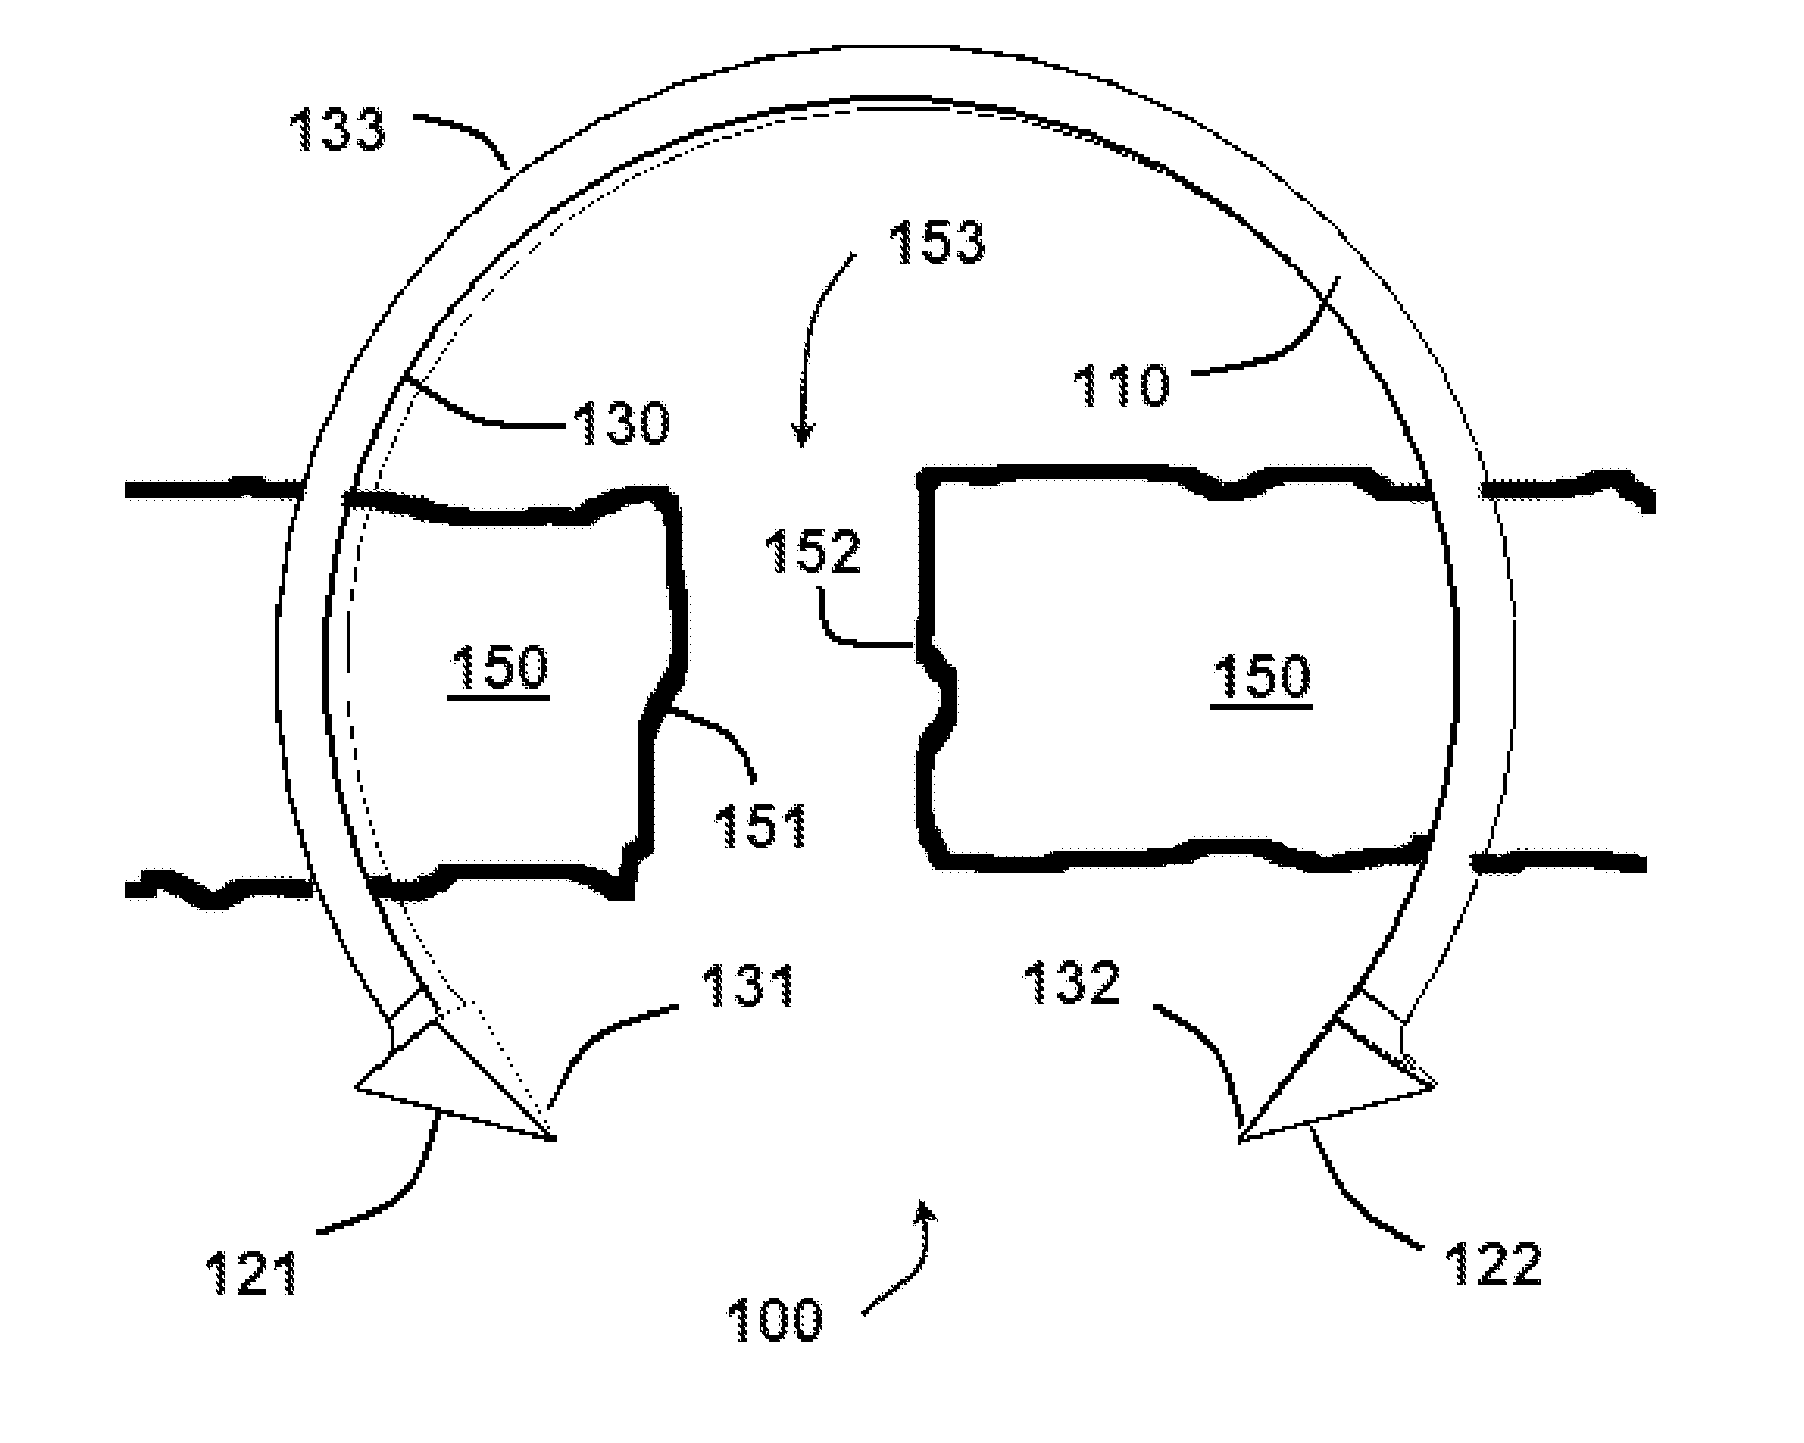 Method and System for Tissue Fastening